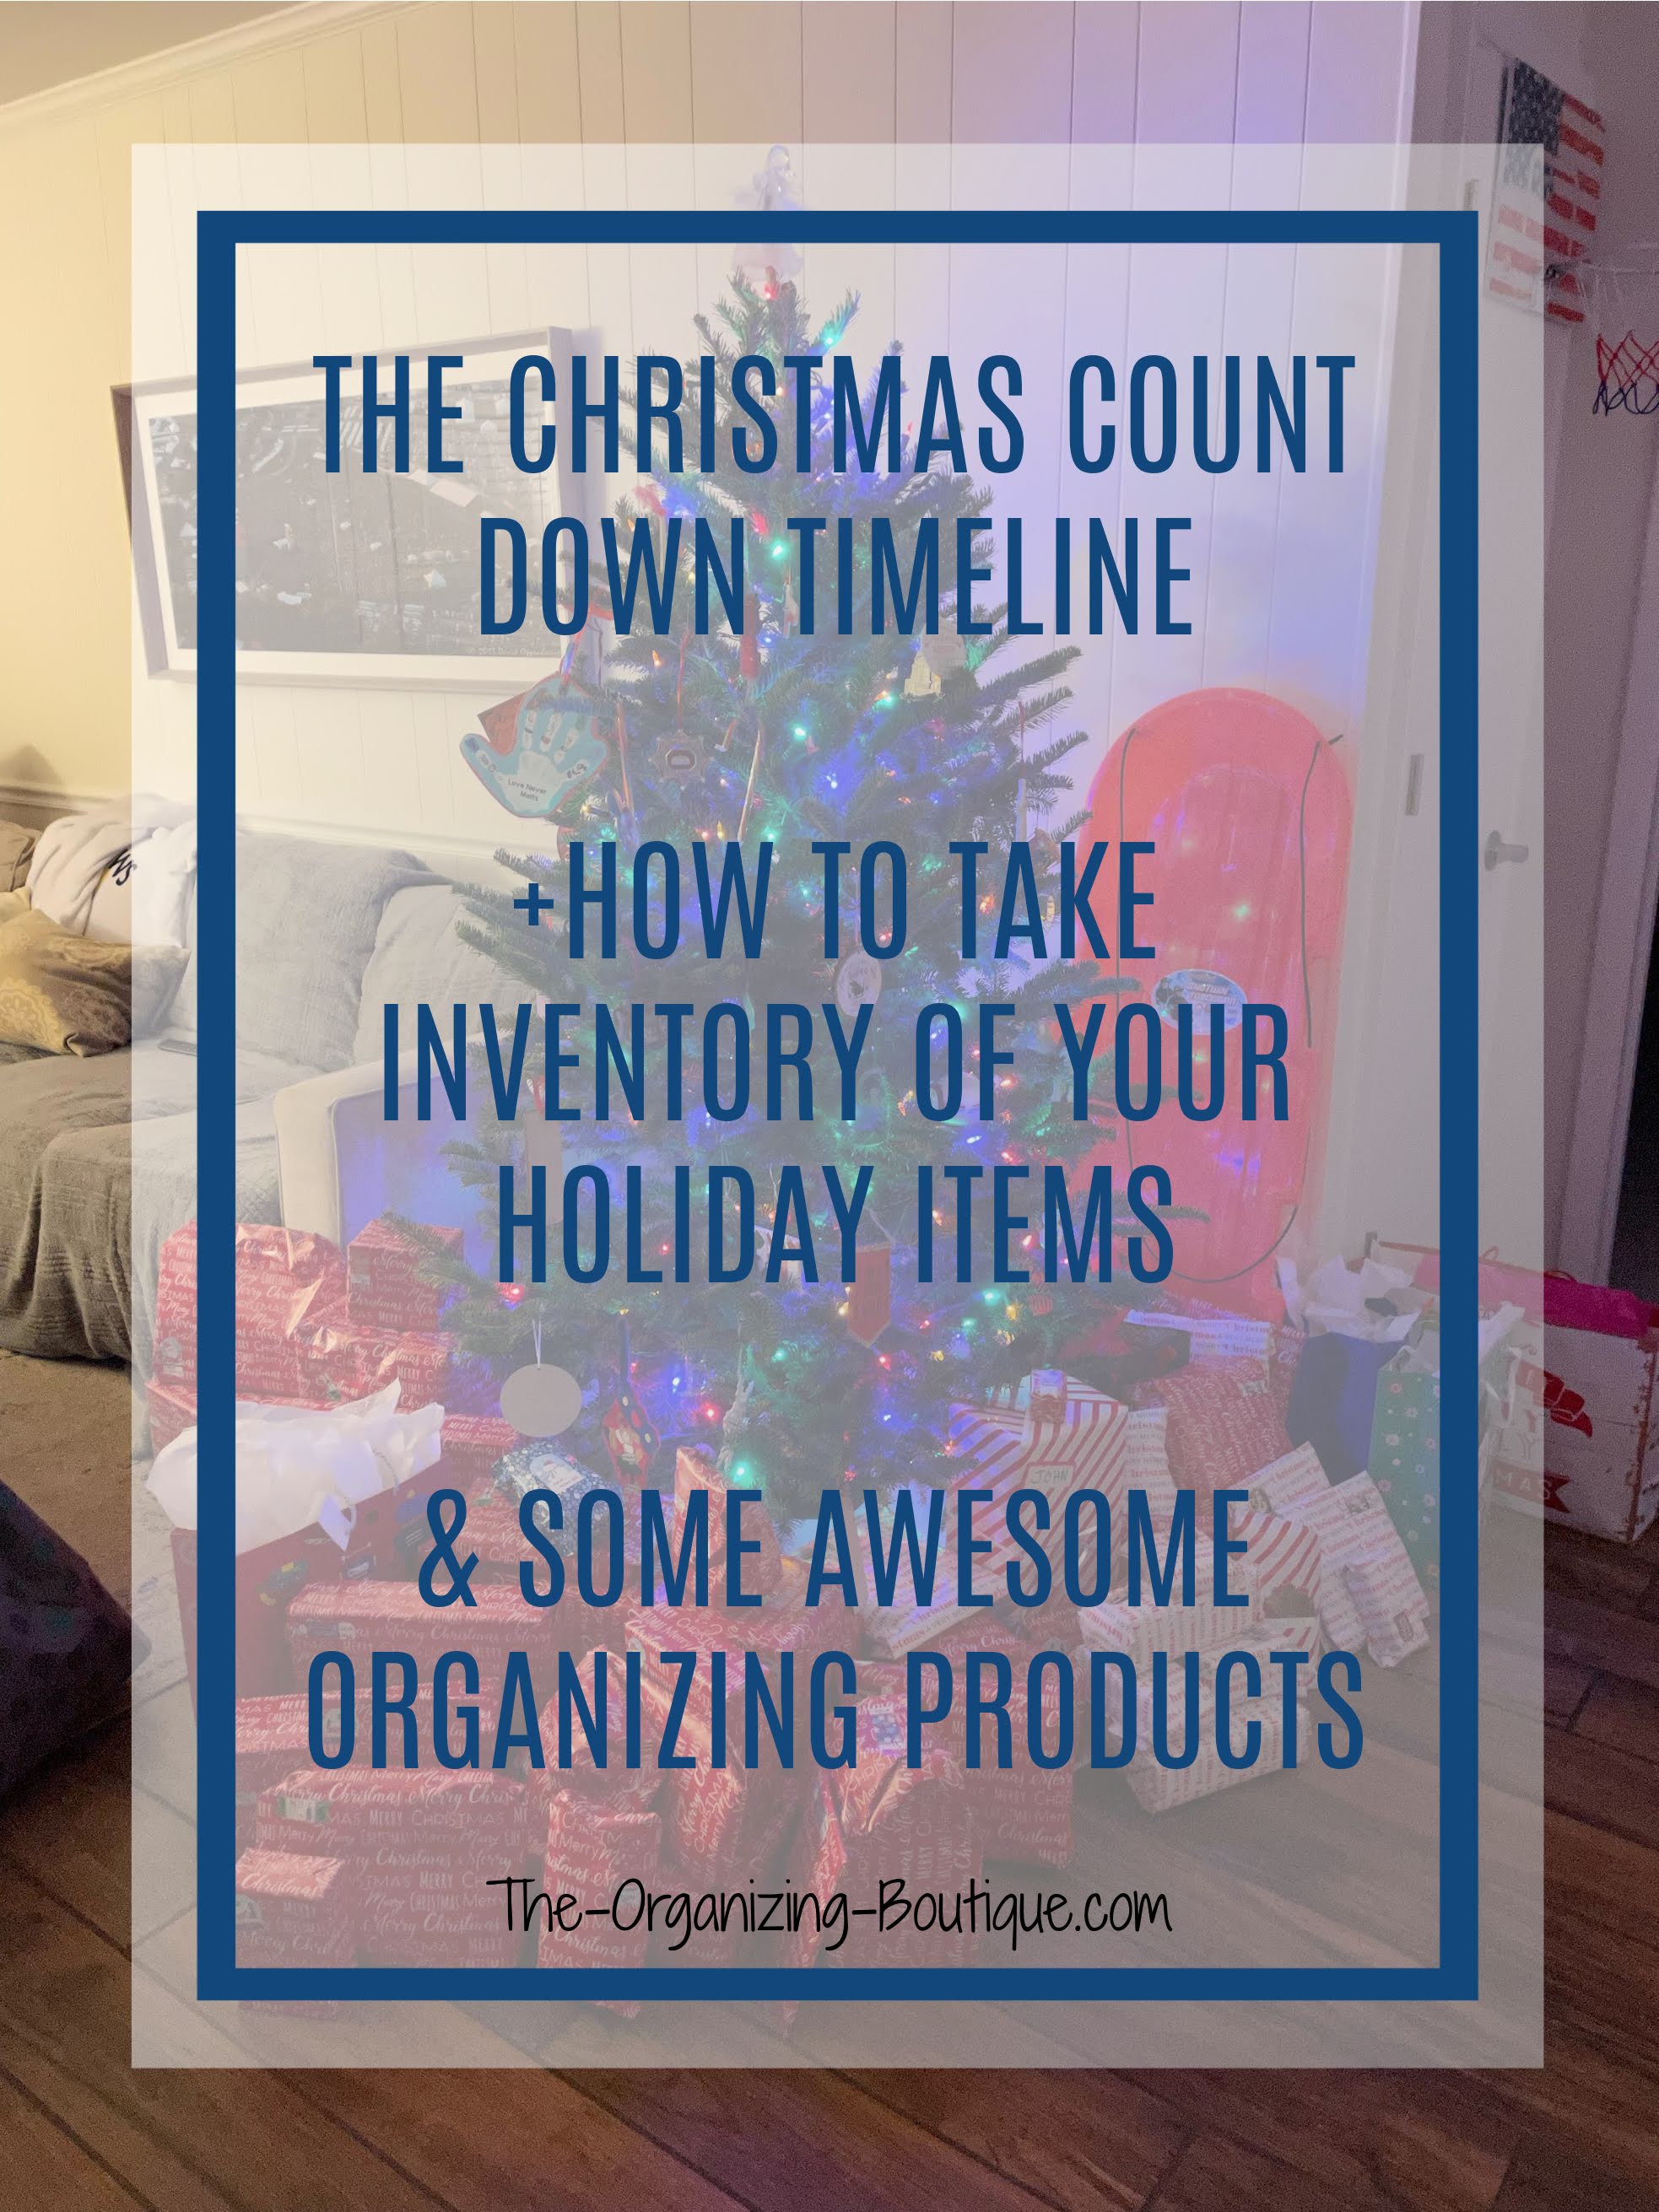 Simplify your holiday season with these great Christmas organizer tips, timeline and product suggestions like Christmas storage boxes!